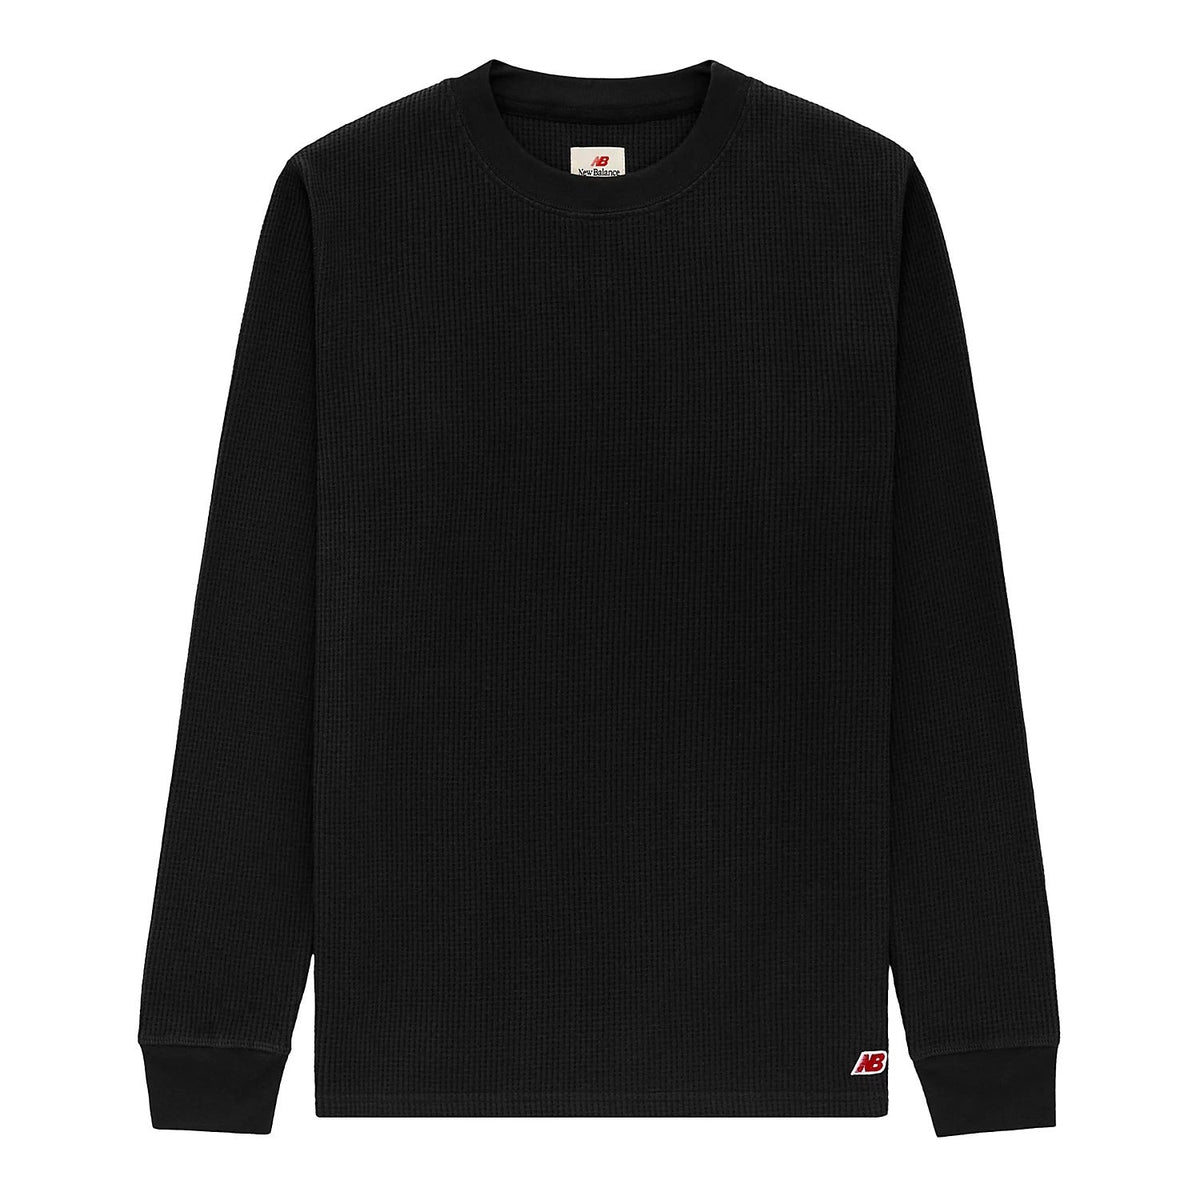 New Balance Men Long Sleeve Thermal Tee Black Made In USA Core MT23546-BLK - T-SHIRTS - Canada